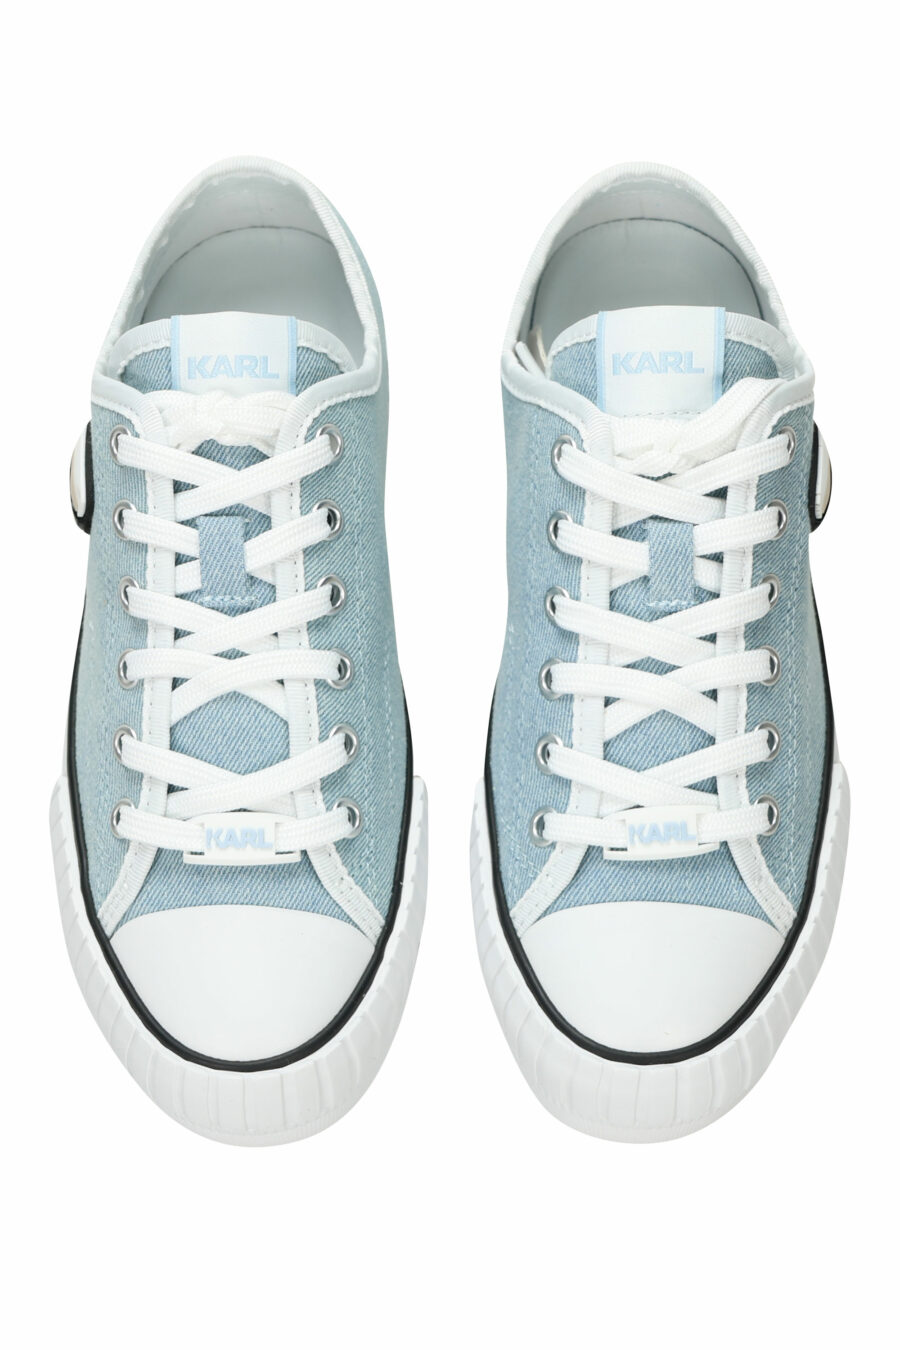 Light blue "converse" style trainers with "karl" rubber mini-logo - 5059529384691 4